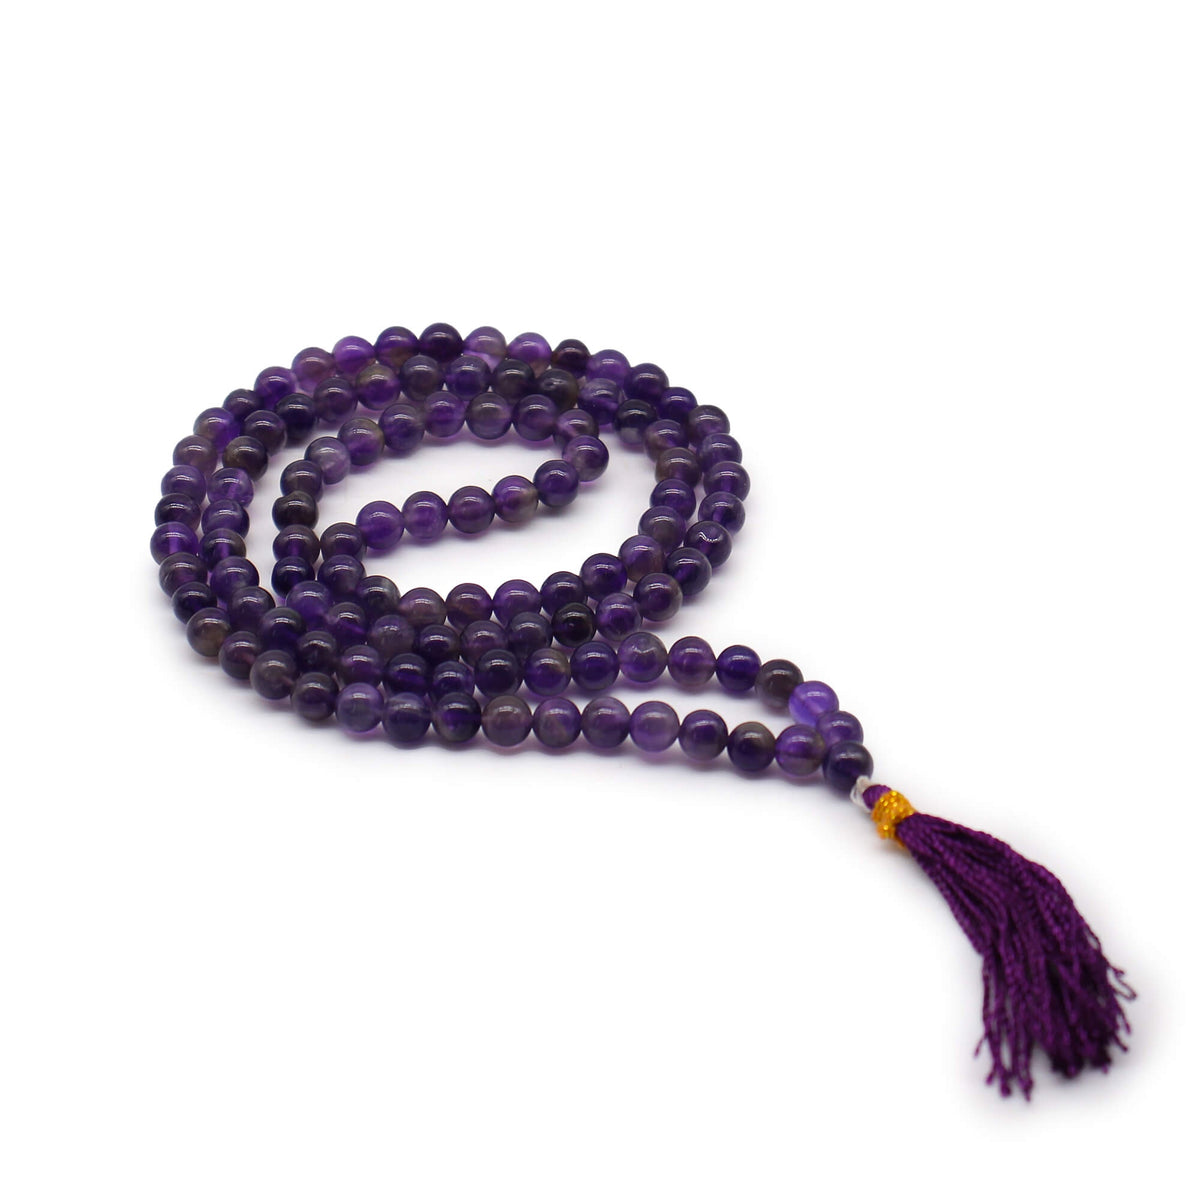 Amethyst 108 Bead Mala Necklace at Under the Sun Southend